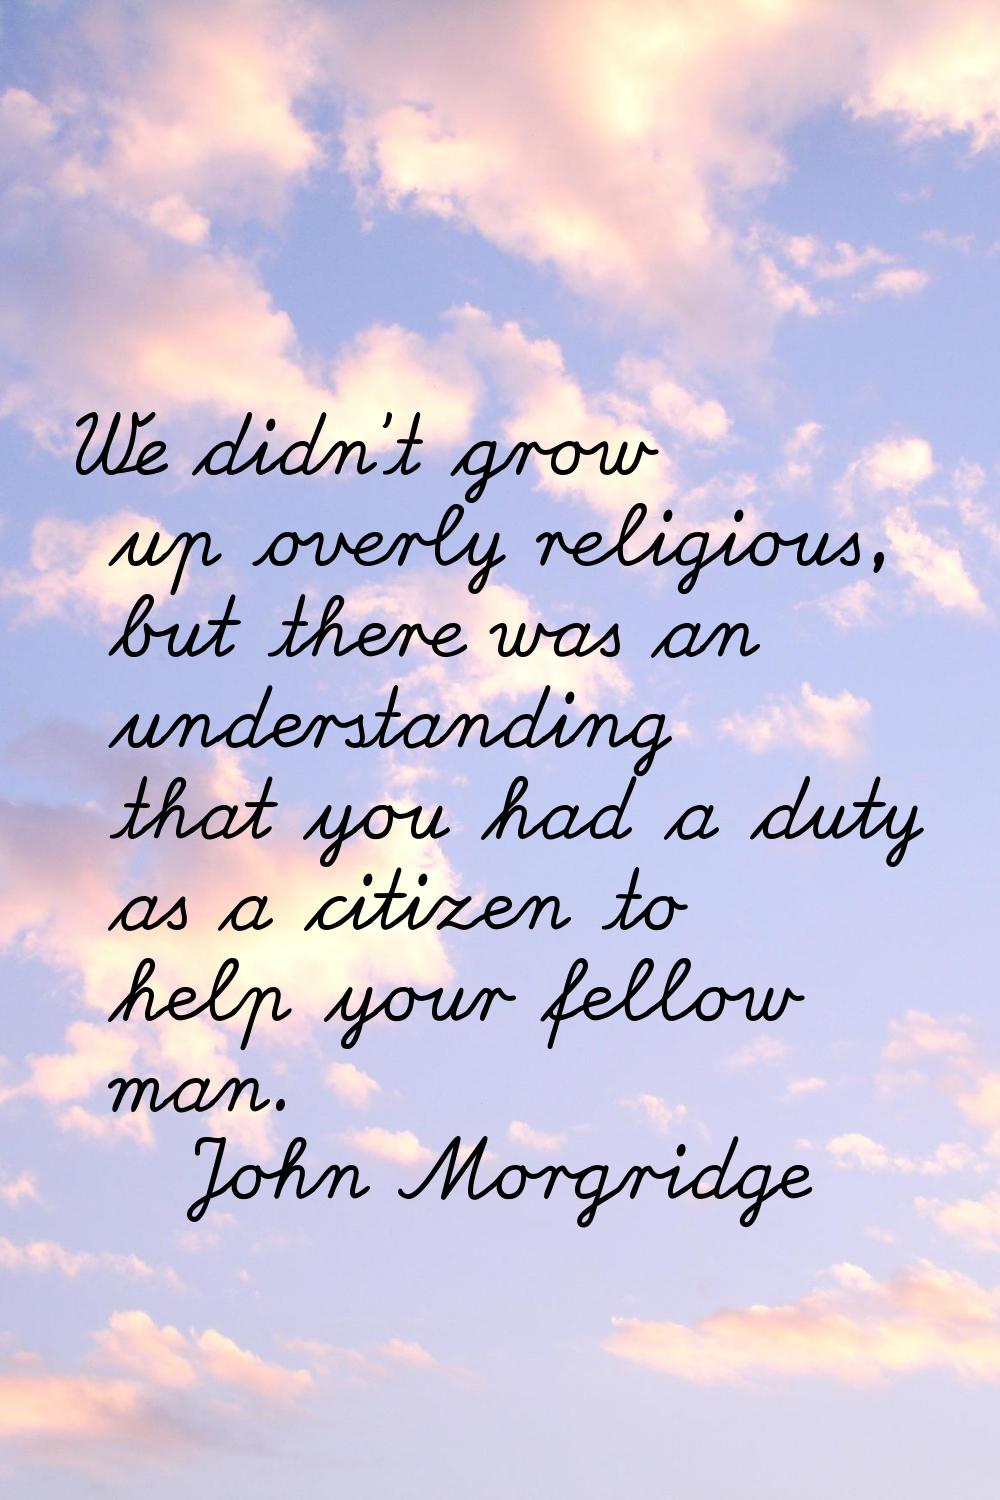 We didn't grow up overly religious, but there was an understanding that you had a duty as a citizen